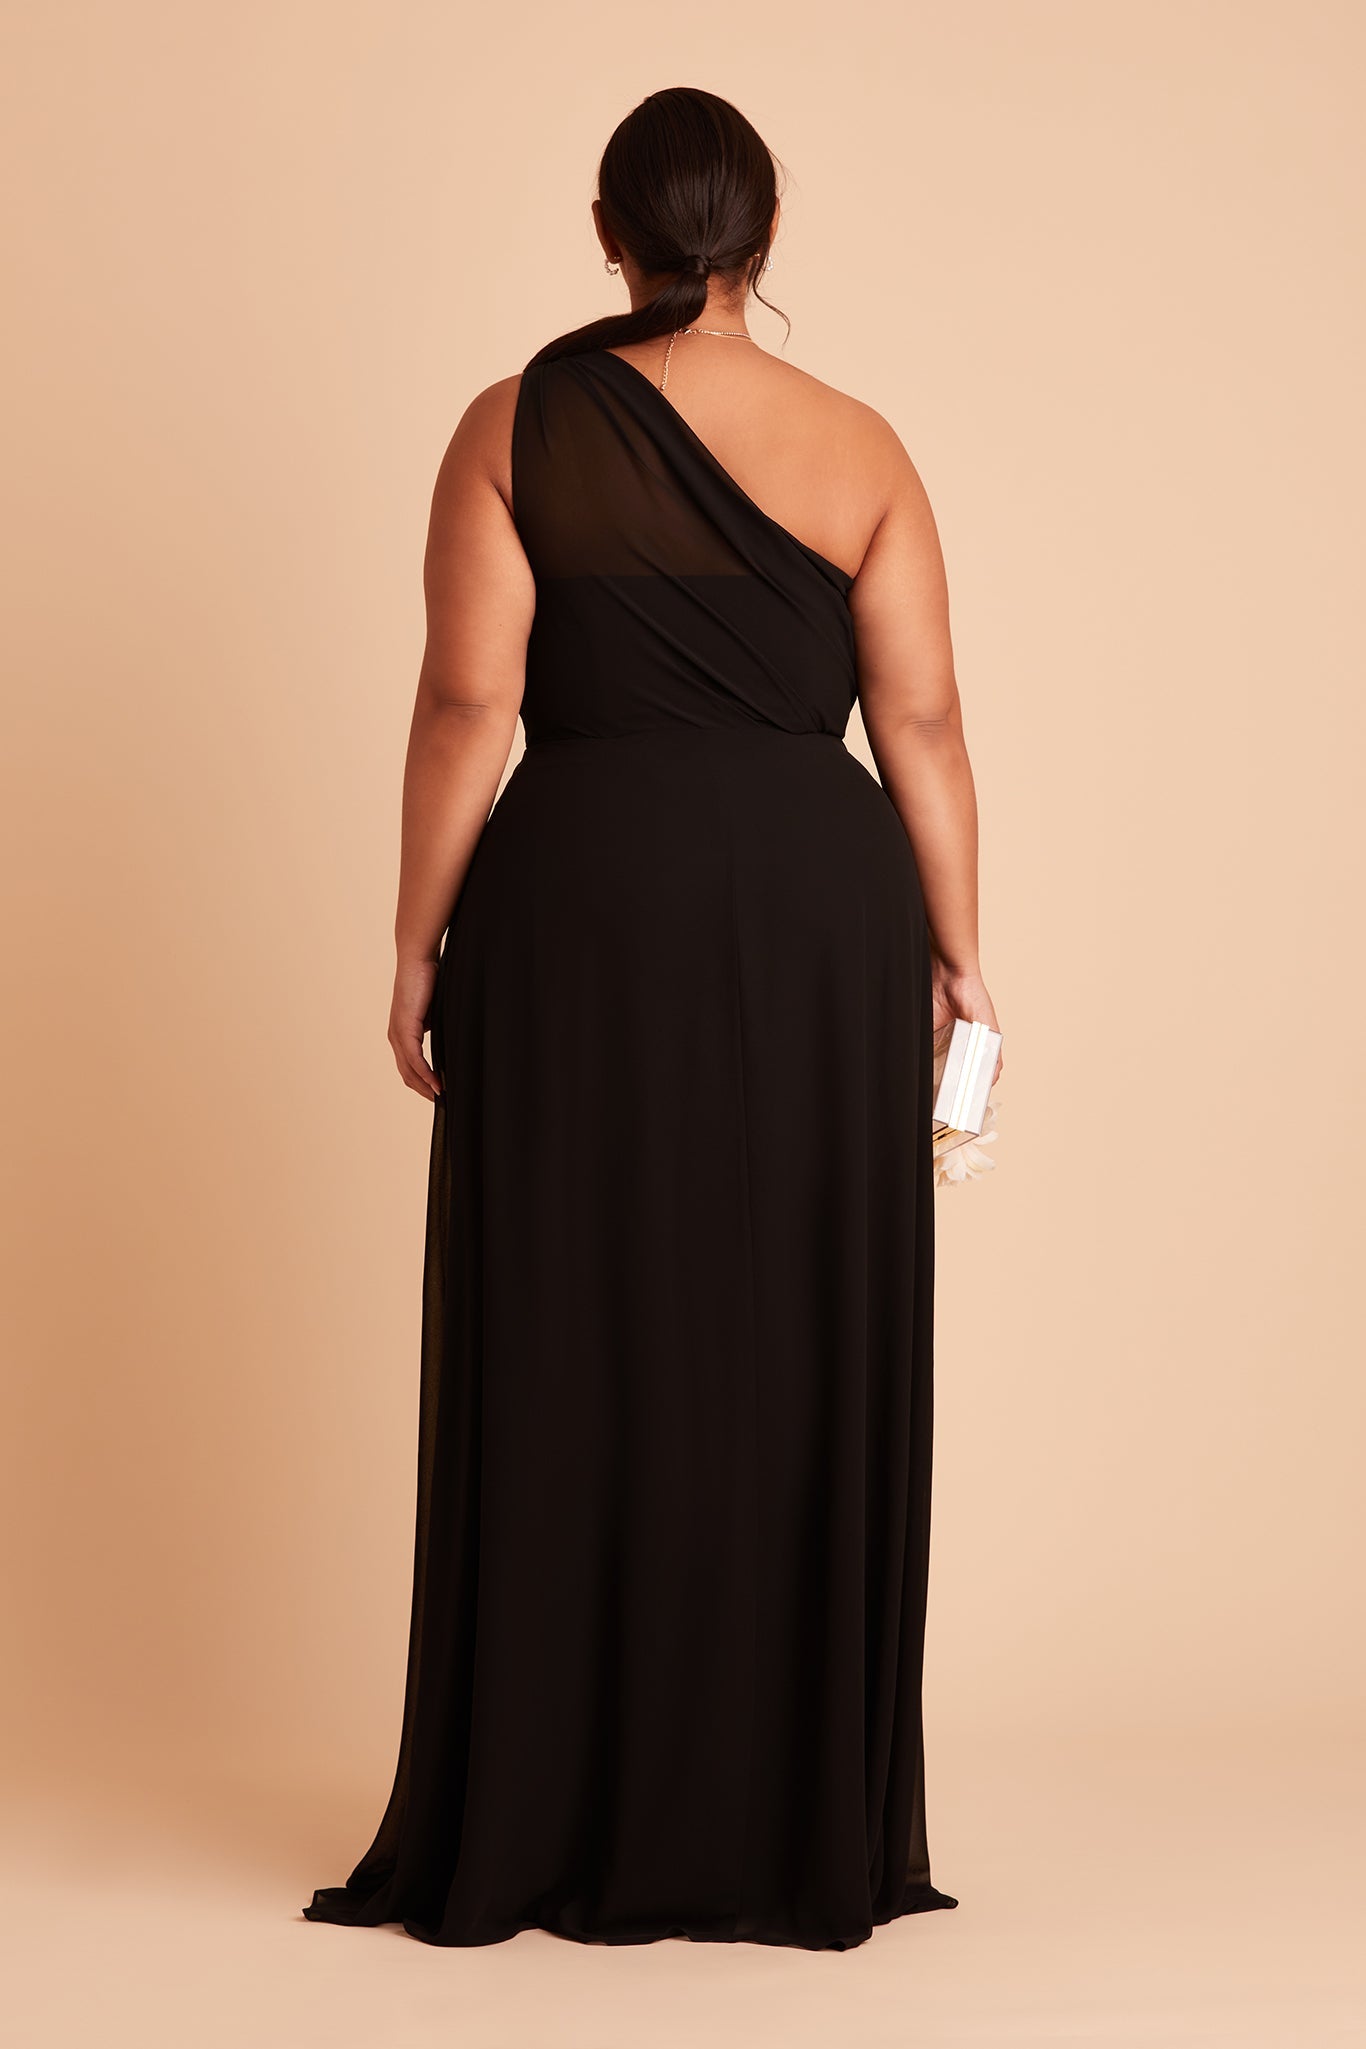 Back view of the Kira Dress Curve in black chiffon shows a full-figured model with a medium skin tone wearing sheer, softly pleating chiffon gathered at the bodice shoulder and draping across the back to the side seam as the dress flows to the floor.